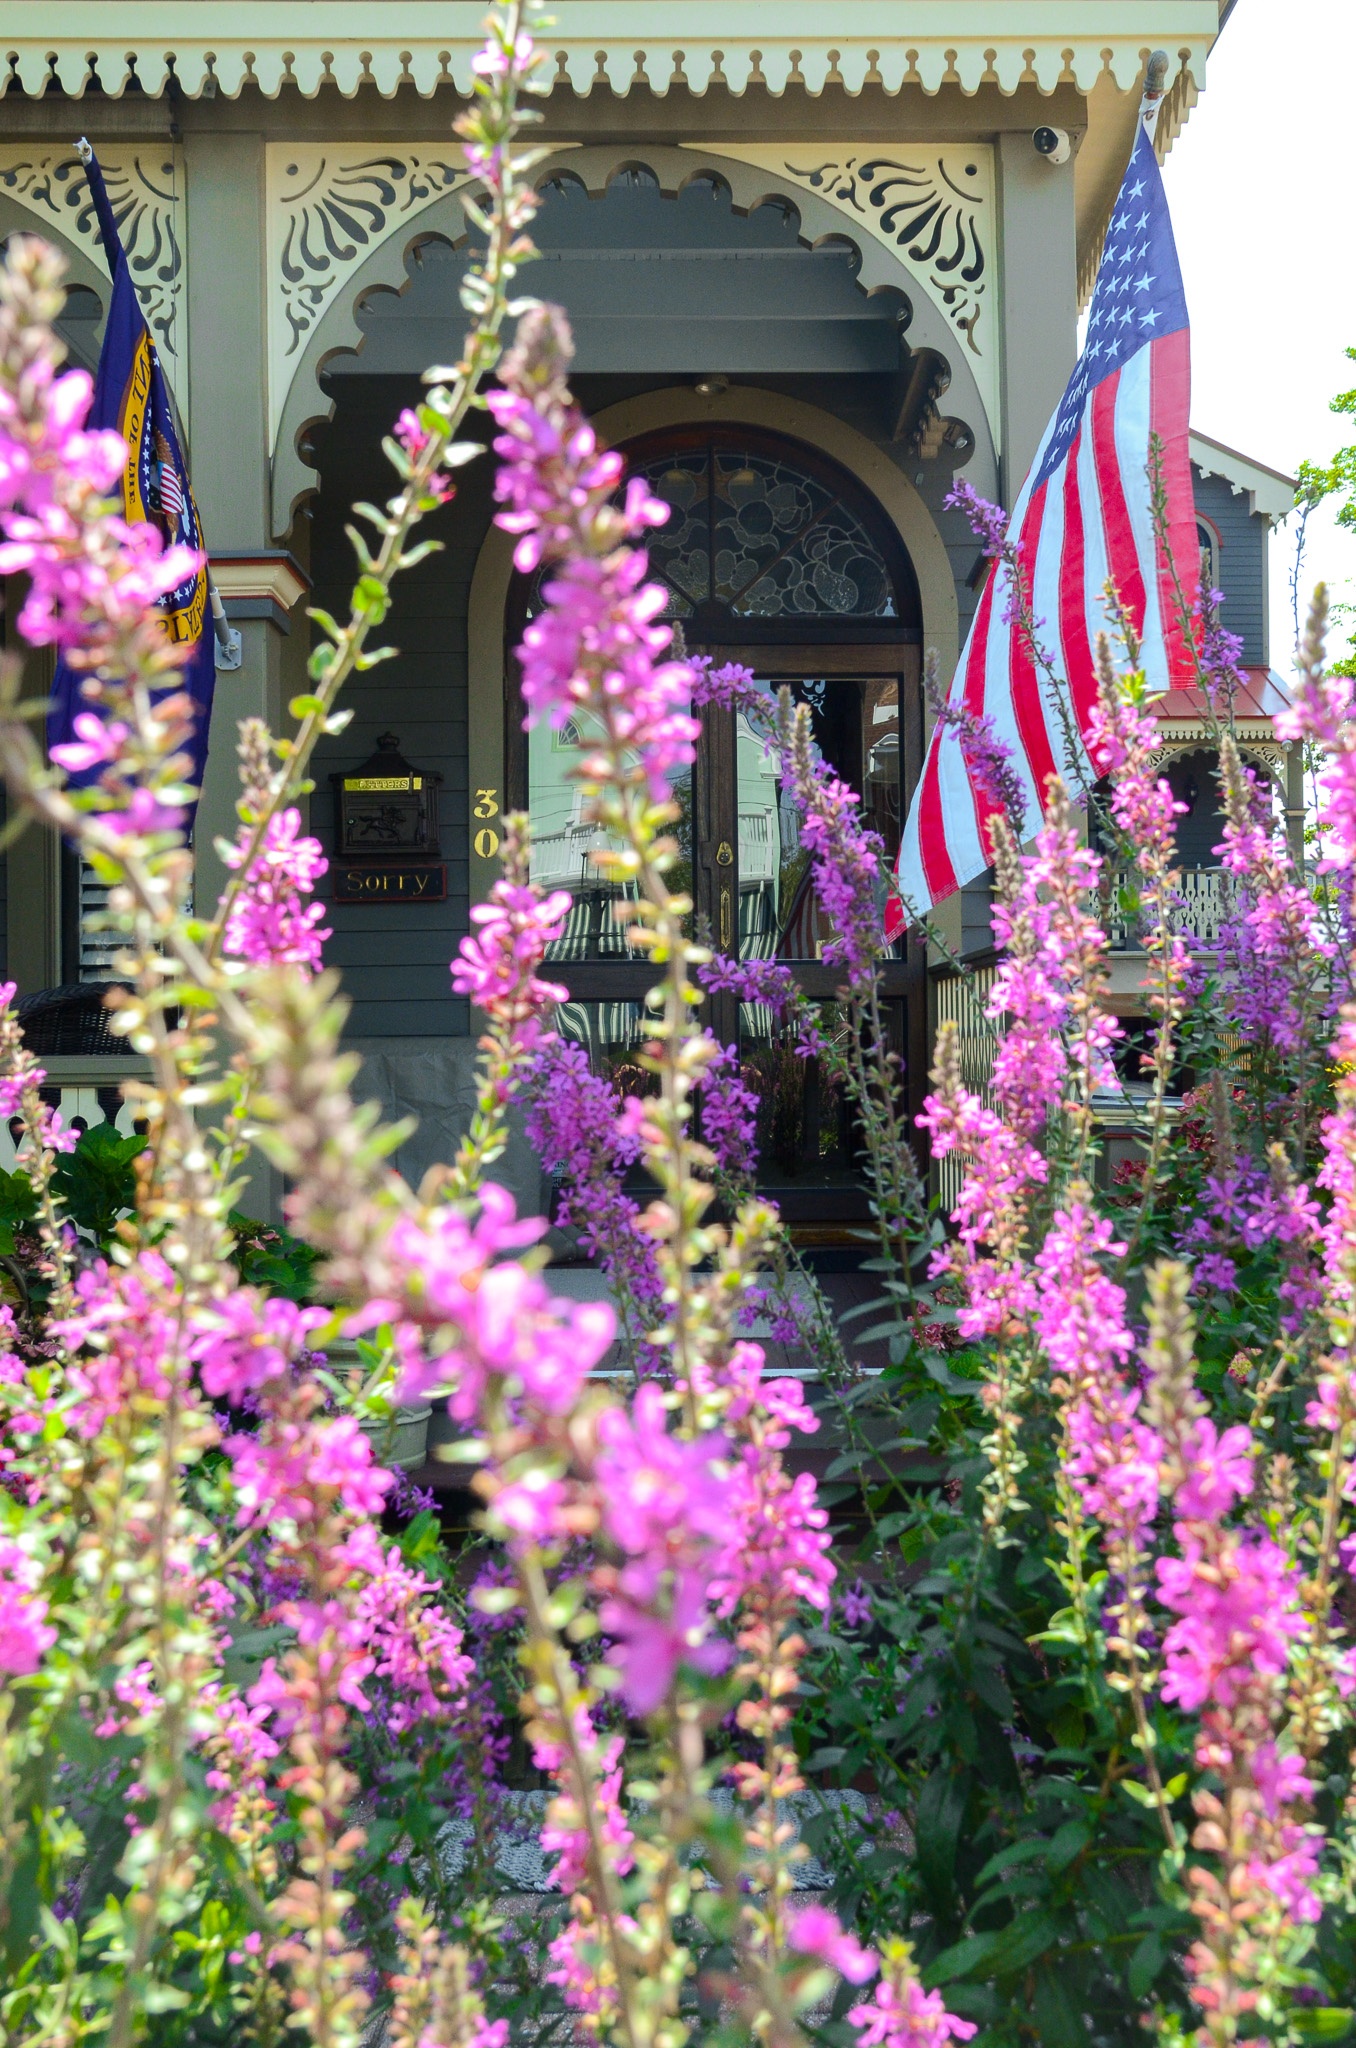 Sunny Day at the John Wesley Inn & Carriage House with Flowers in Bloom 